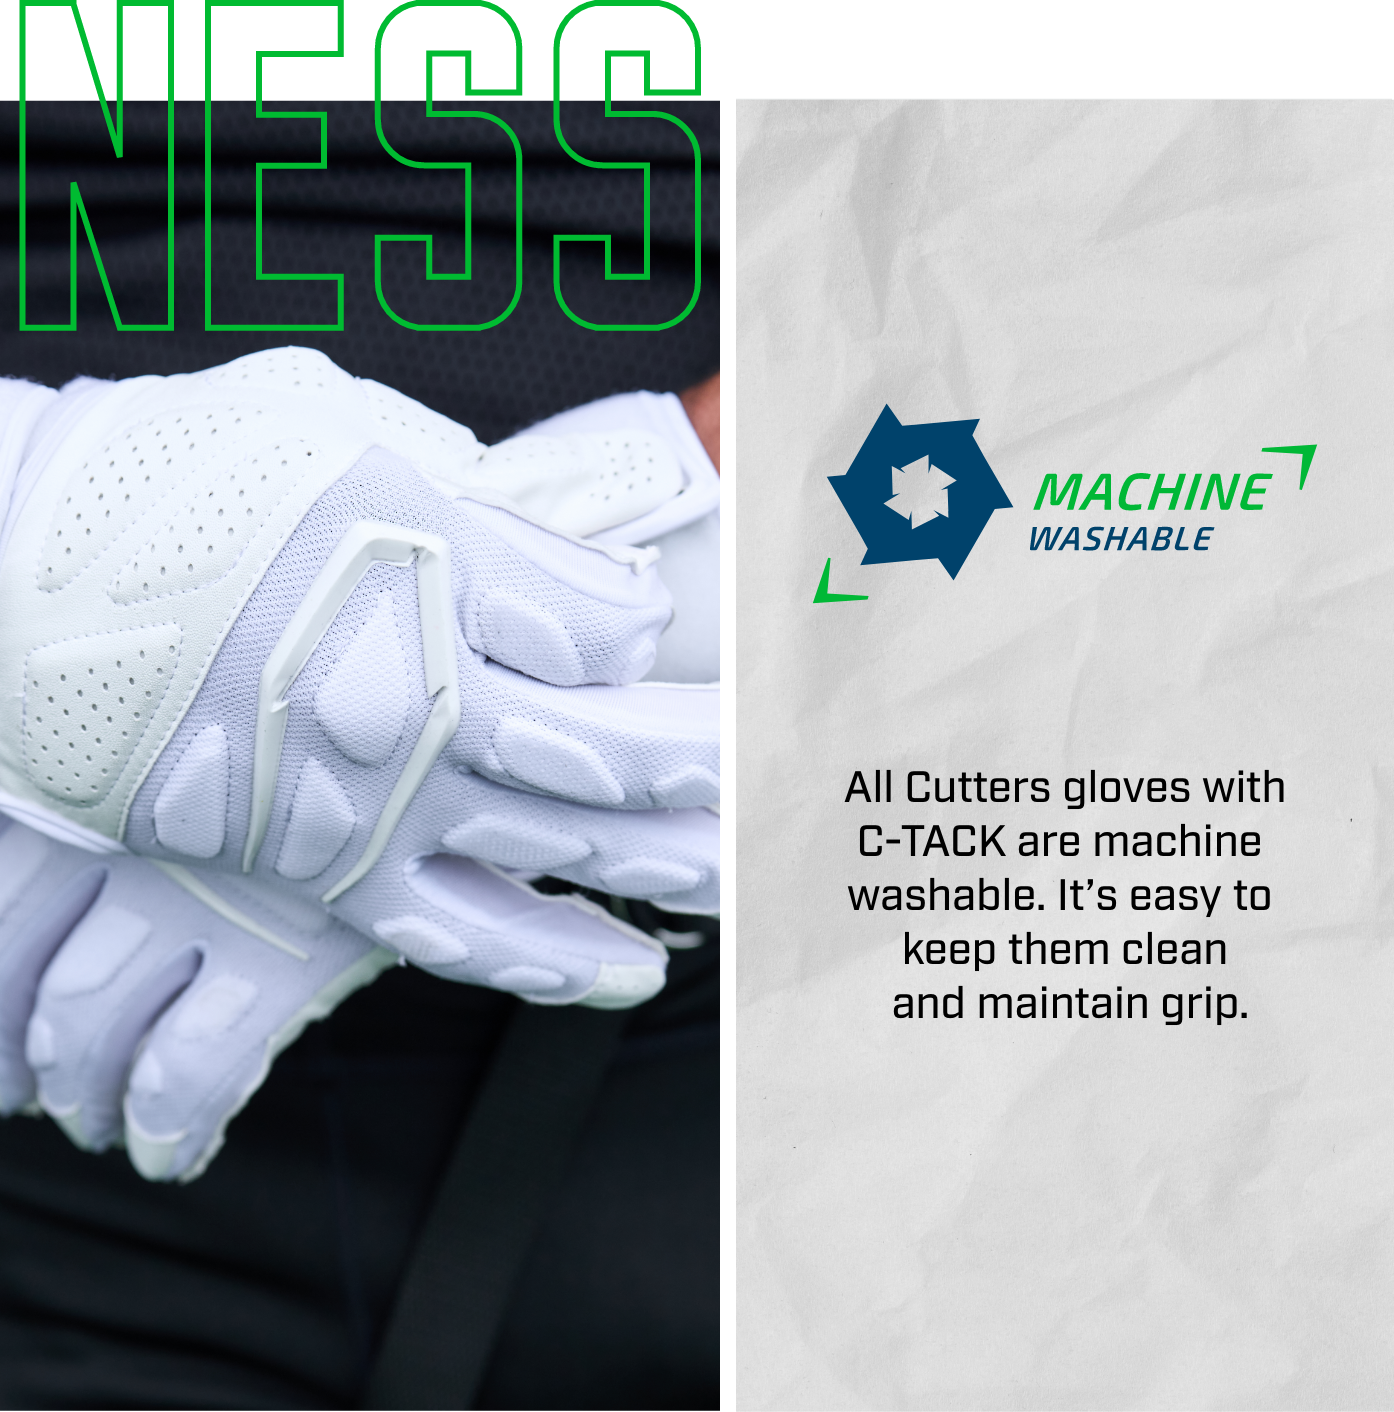 NESS | Machine Washable - All Cutters gloves with C-TACK are machine washable. It's easy to keep them clean and maintain grip.